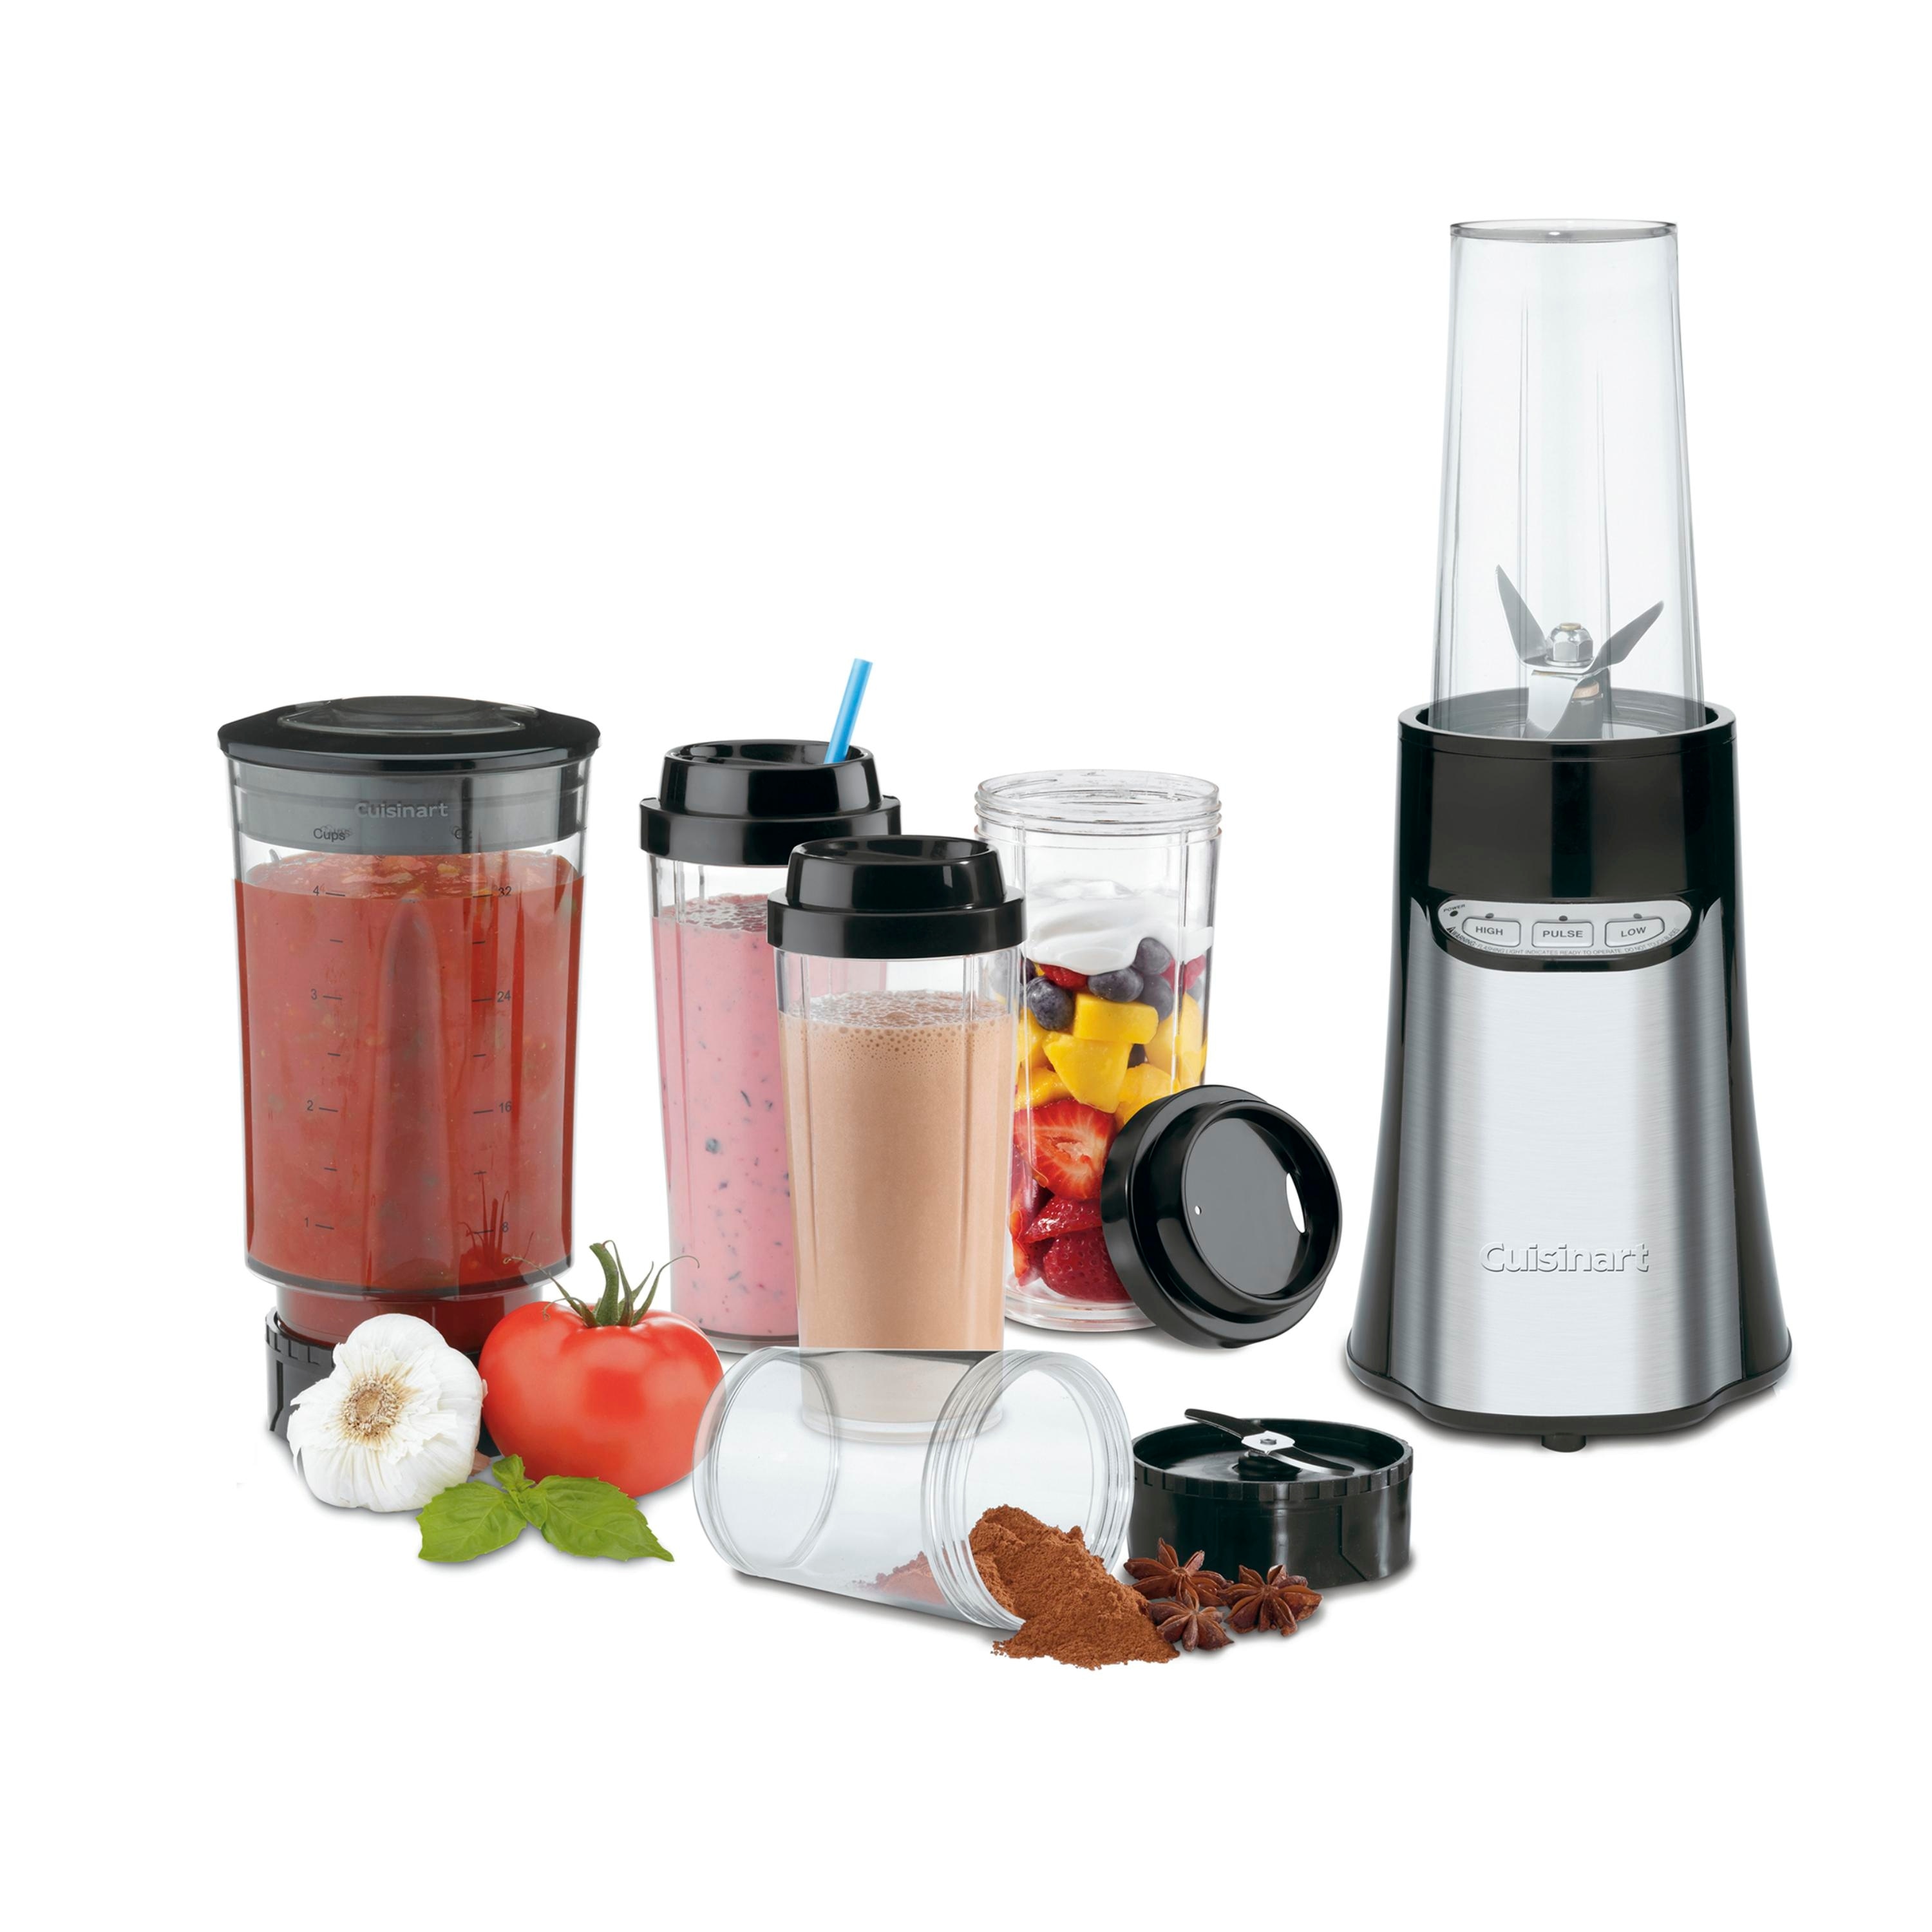 Cuisinart Compact Blender And Juice Extractor Combo & Reviews